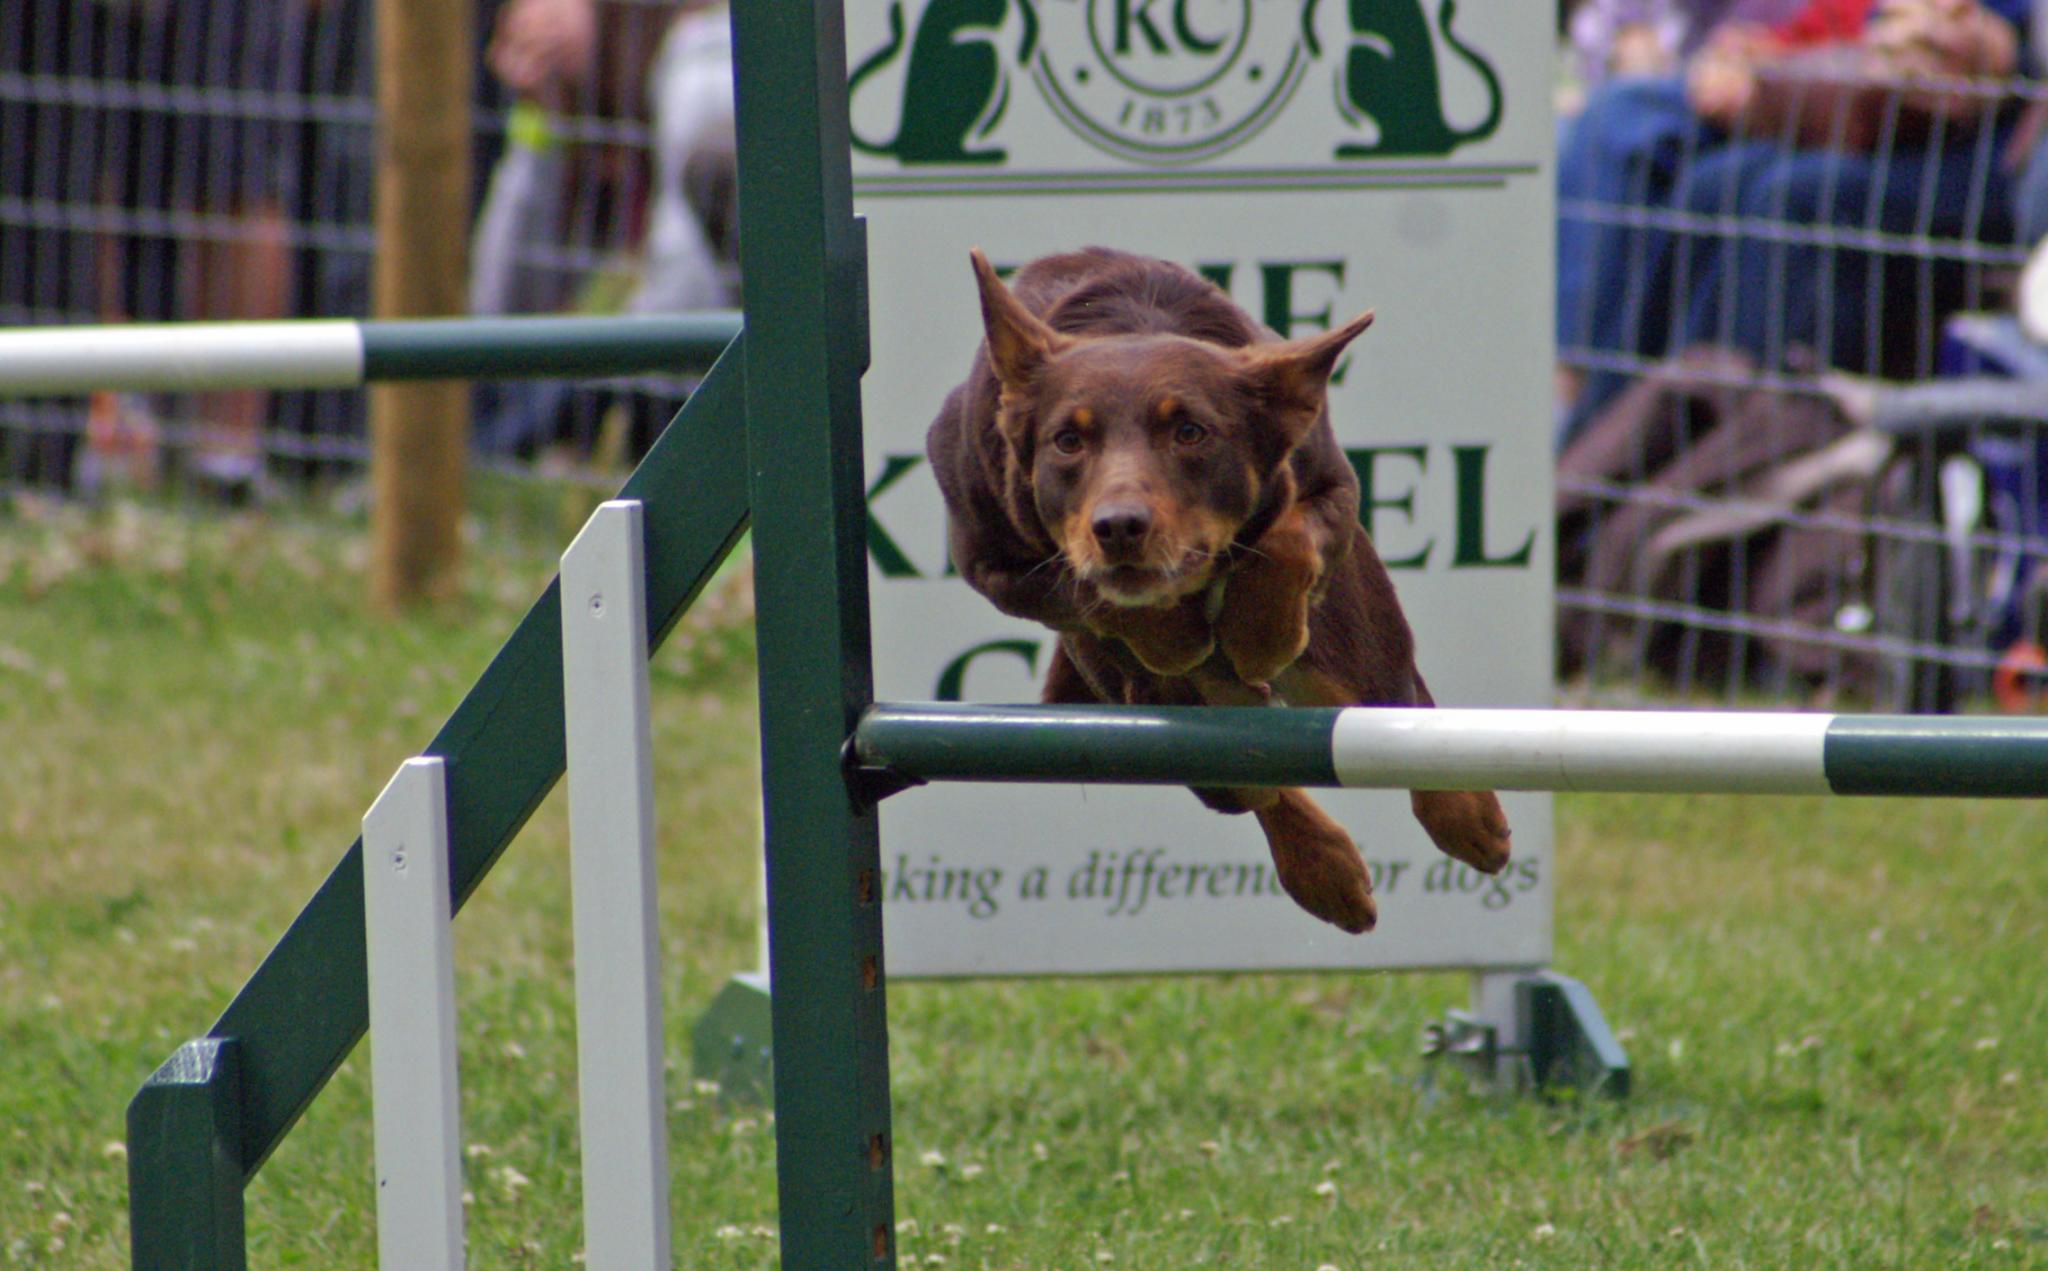 a dog jumps over a rail at a dog show